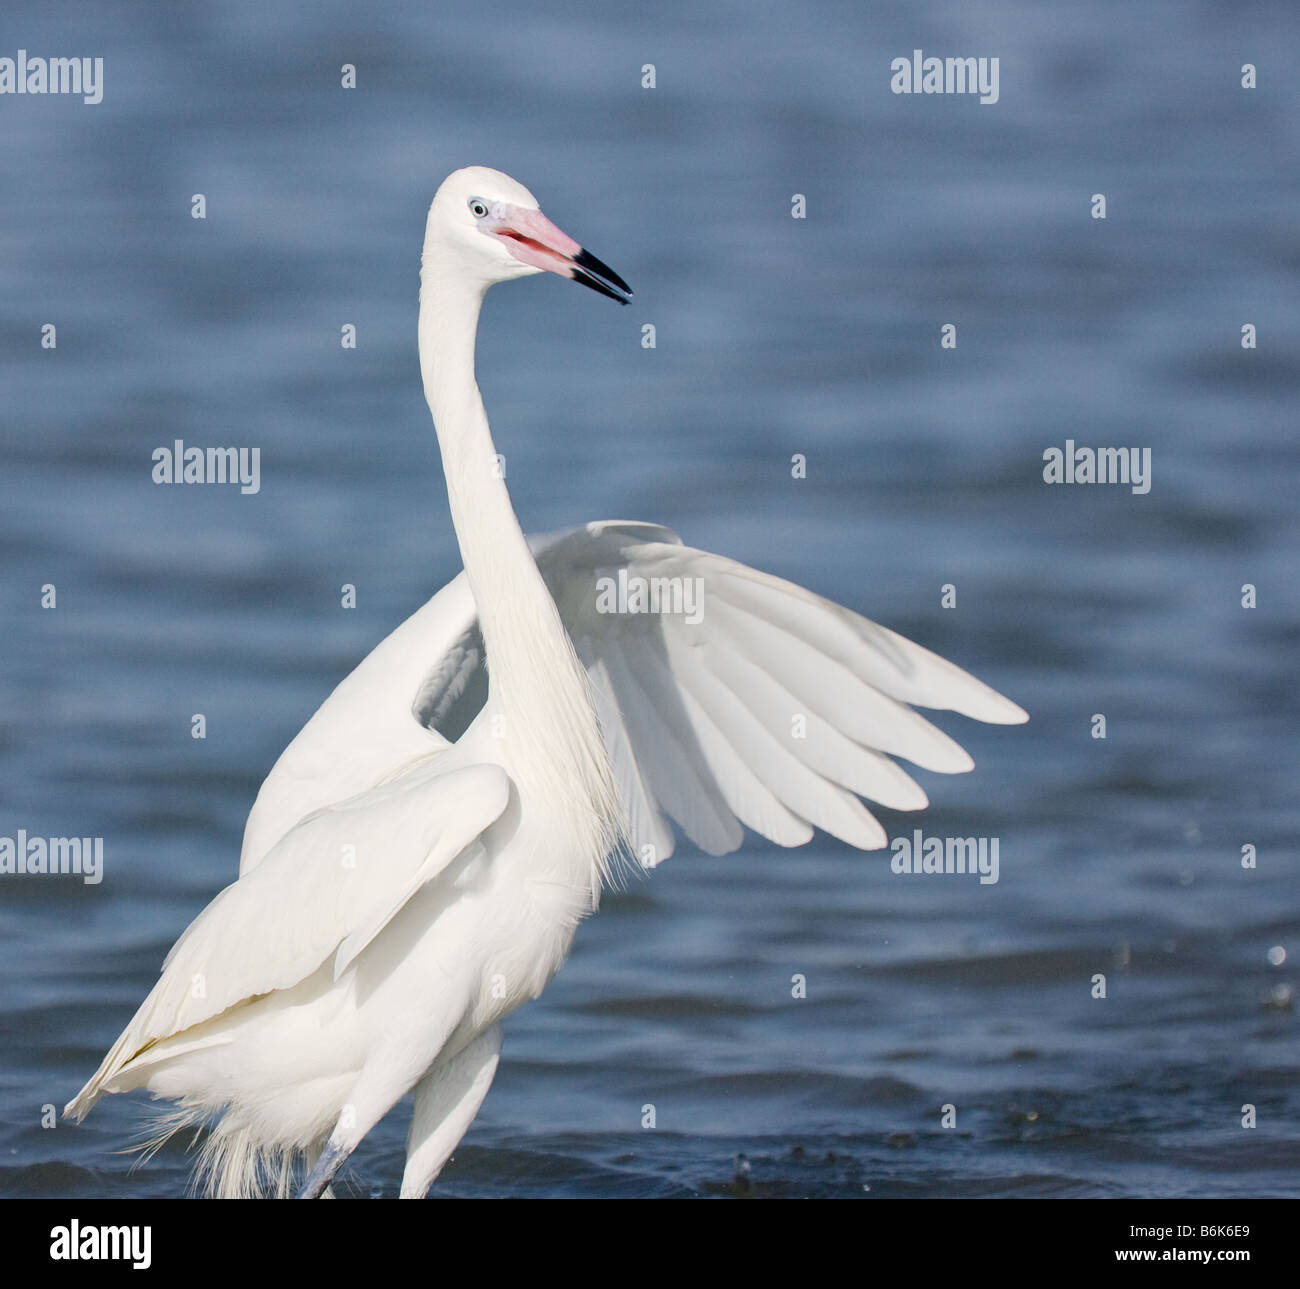 A white morph (genetic variant) Reddish Egret wades in the water at Fort Myers, Florida. Stock Photo